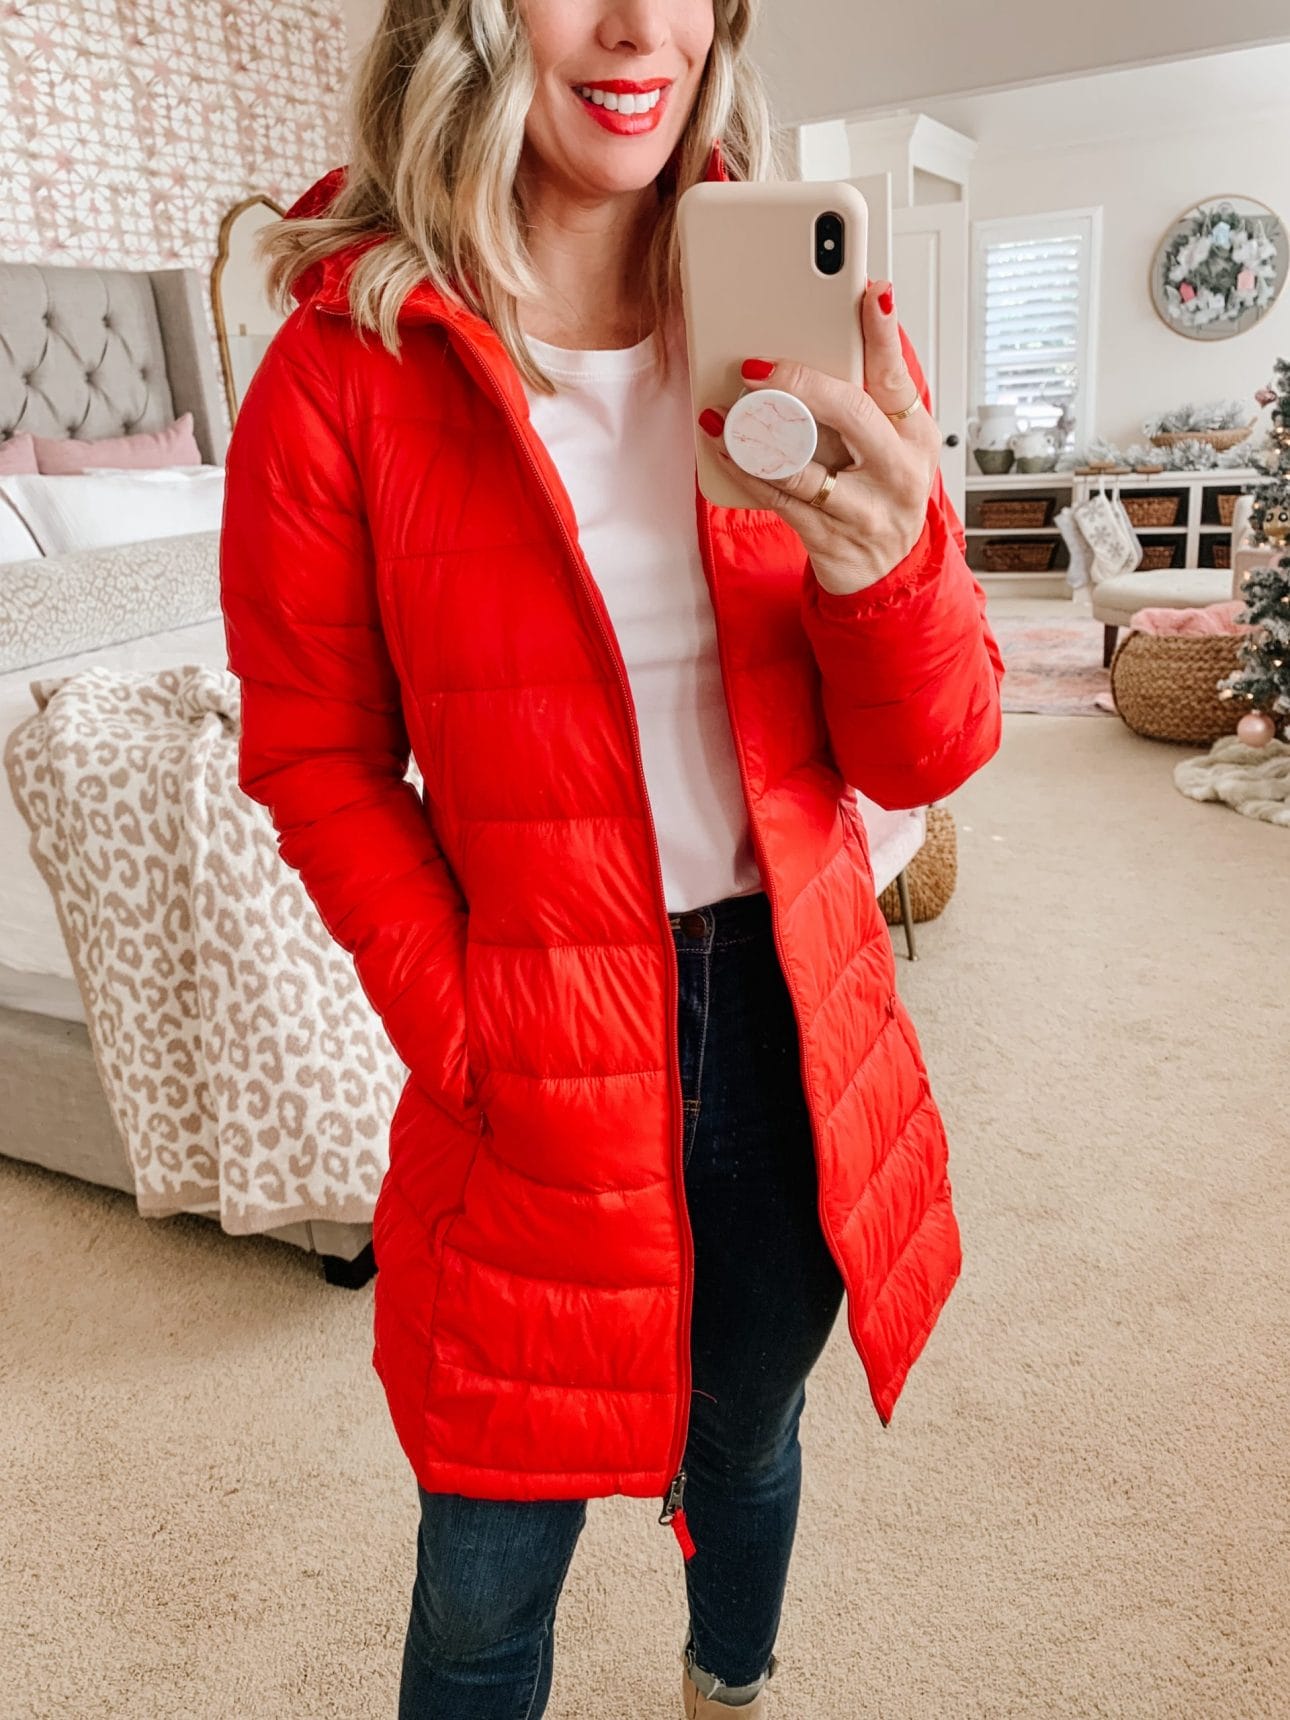 Amazon Fashion, Puffer Coat, Jeans, Booties 